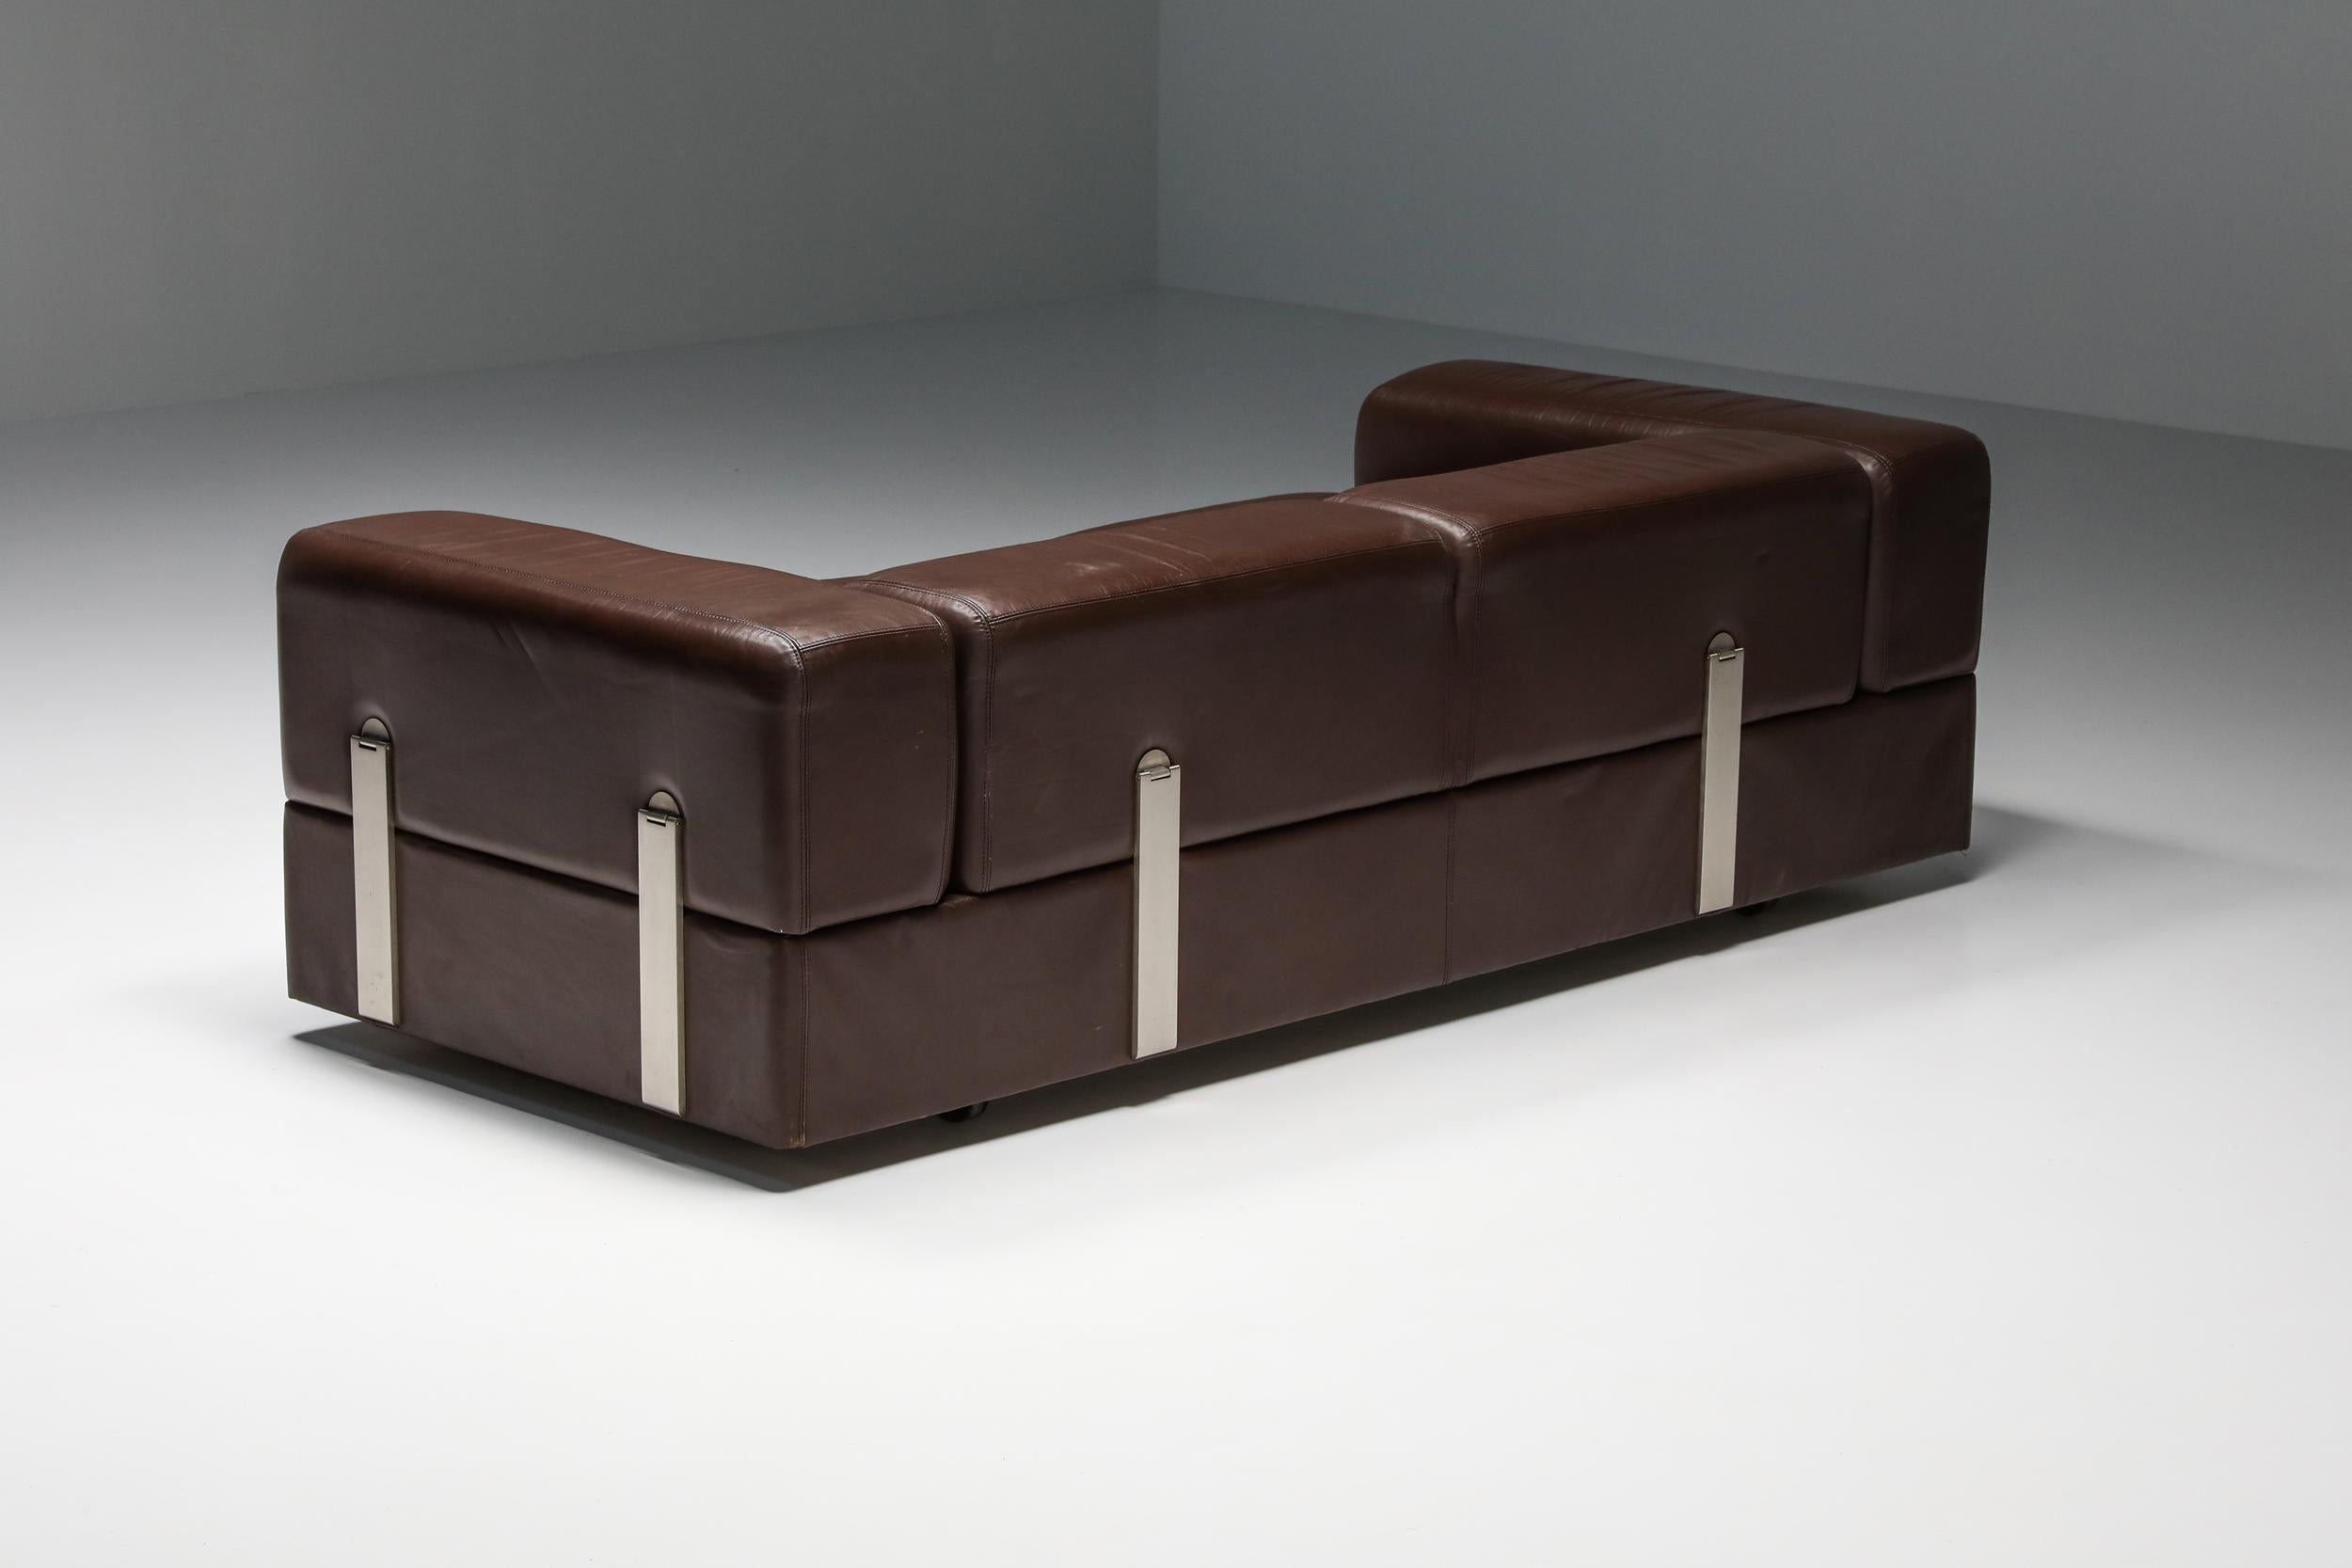 Stainless Steel Post-Modern Daybed Sofa 711 by Tito Agnoli for Cinova in Brown Leather, 1960 For Sale